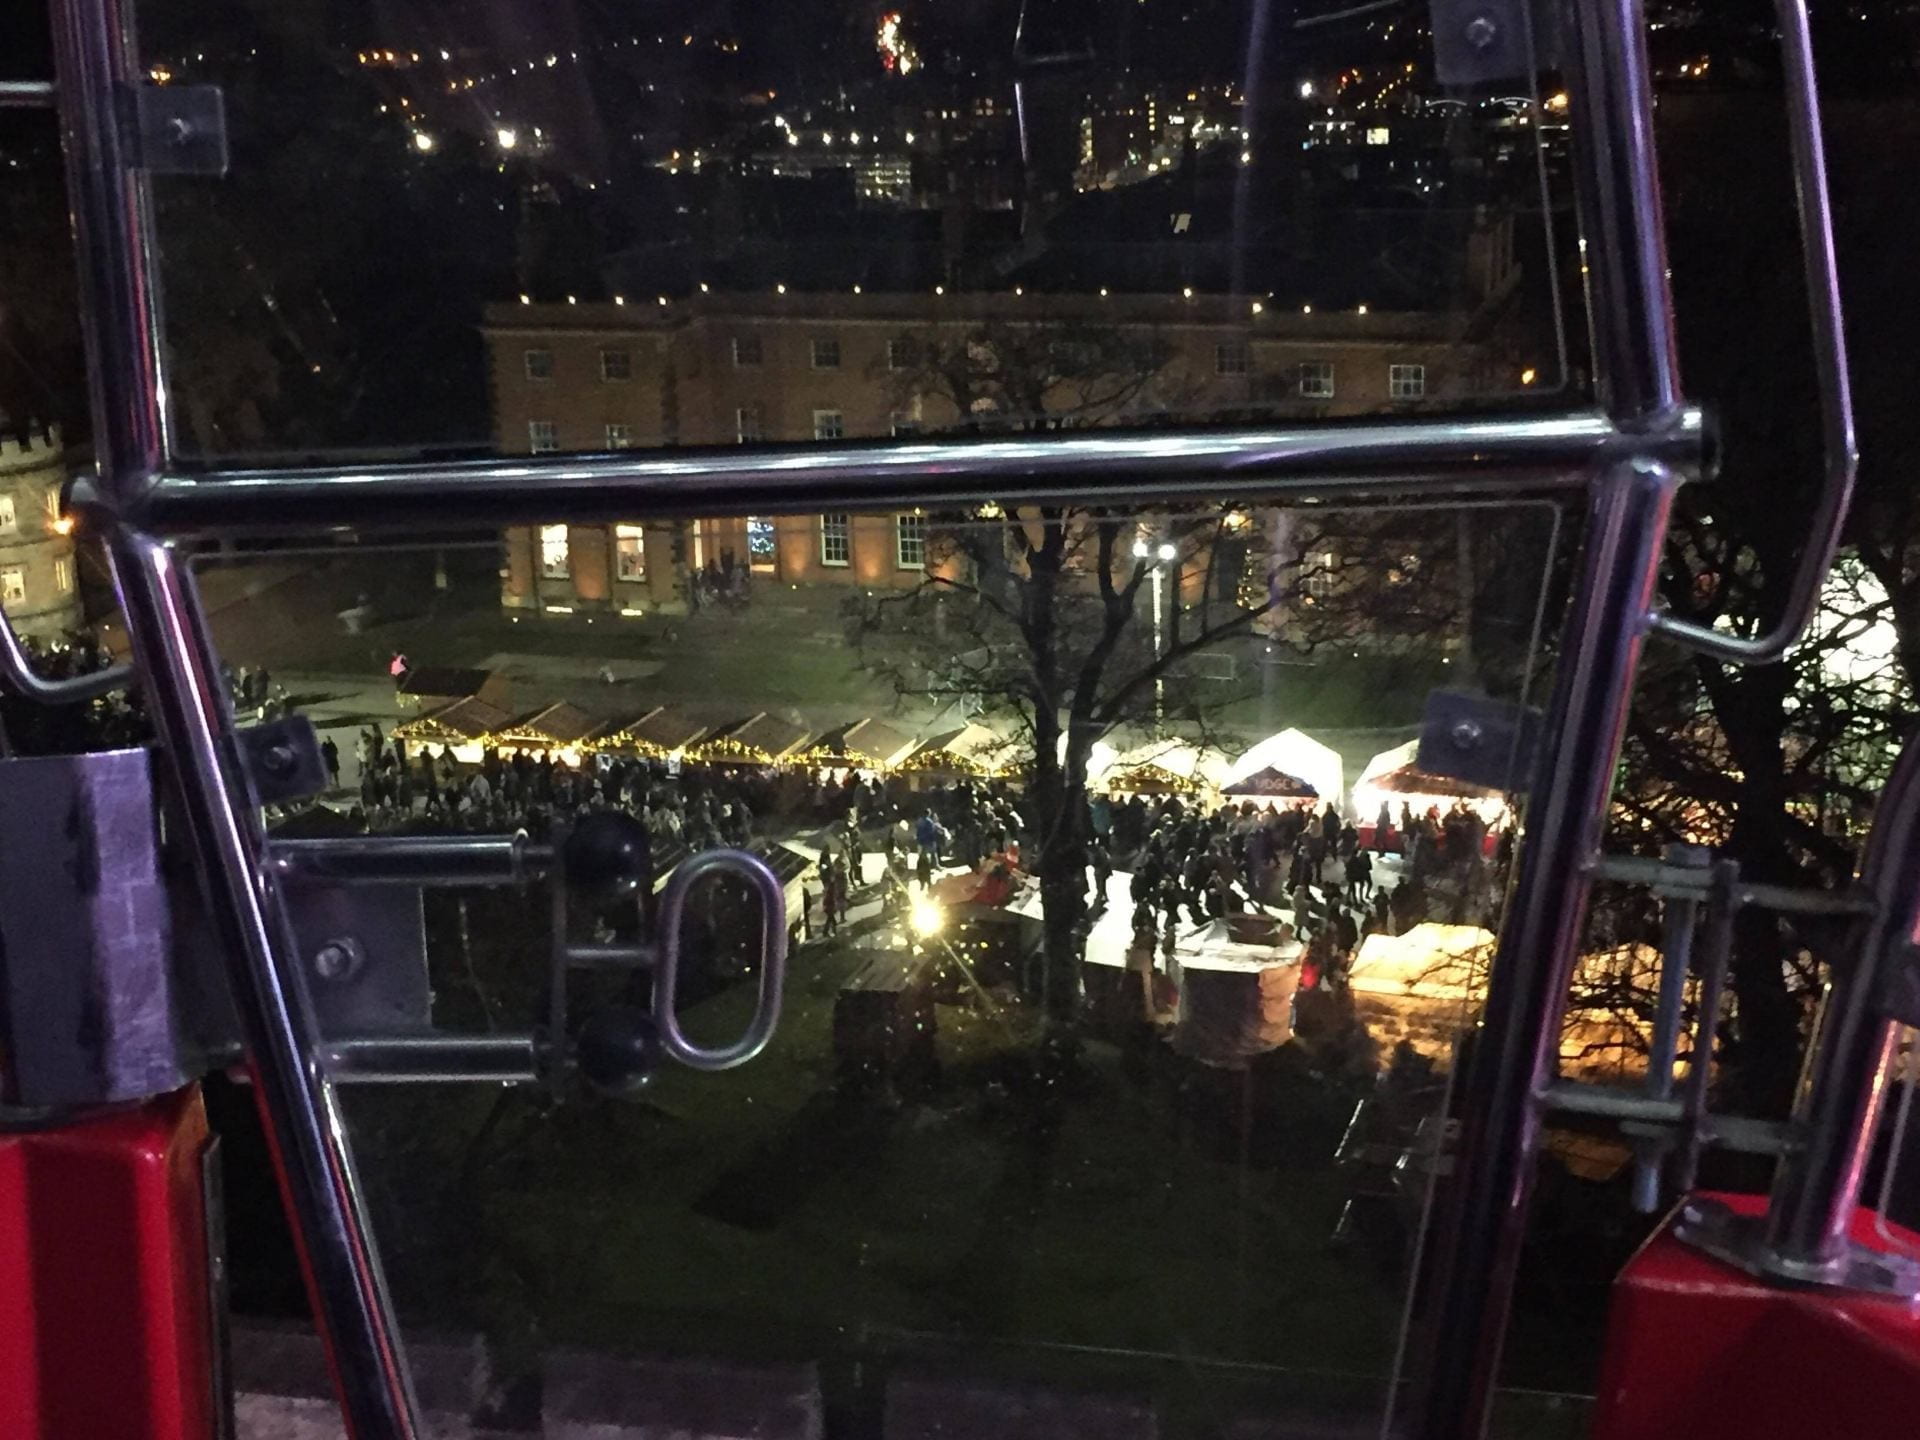 View of the Christmas market from the Ferris wheel.